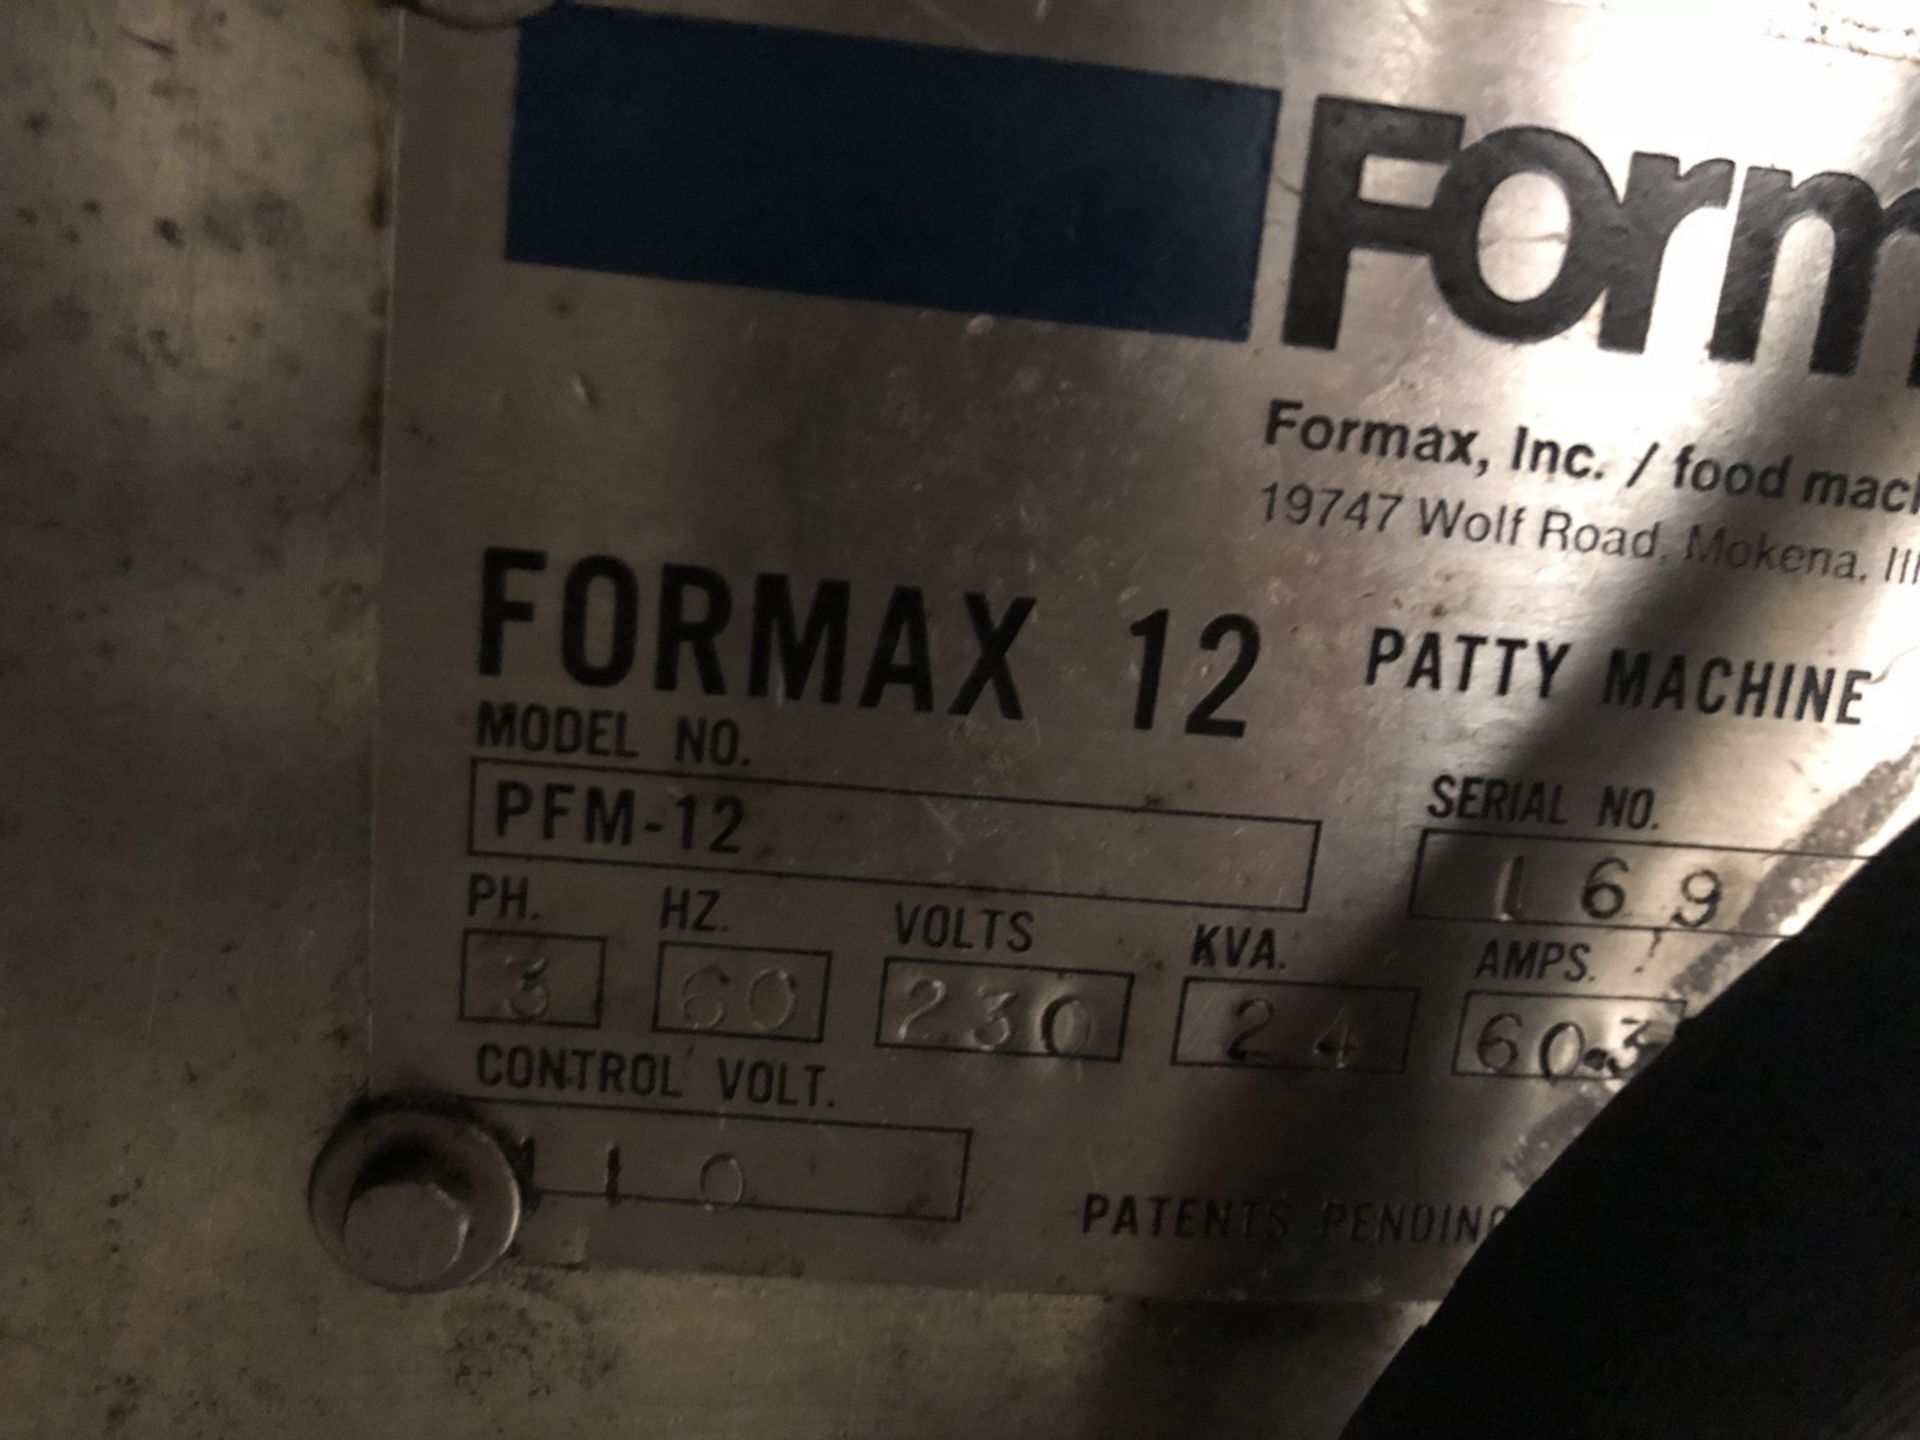 Formax 12 Patty-Former, Model PFM 12, Serial Number 169, Change Parts Include: 1.6 oz, 2.7 Oz, 3.0 - Image 12 of 21